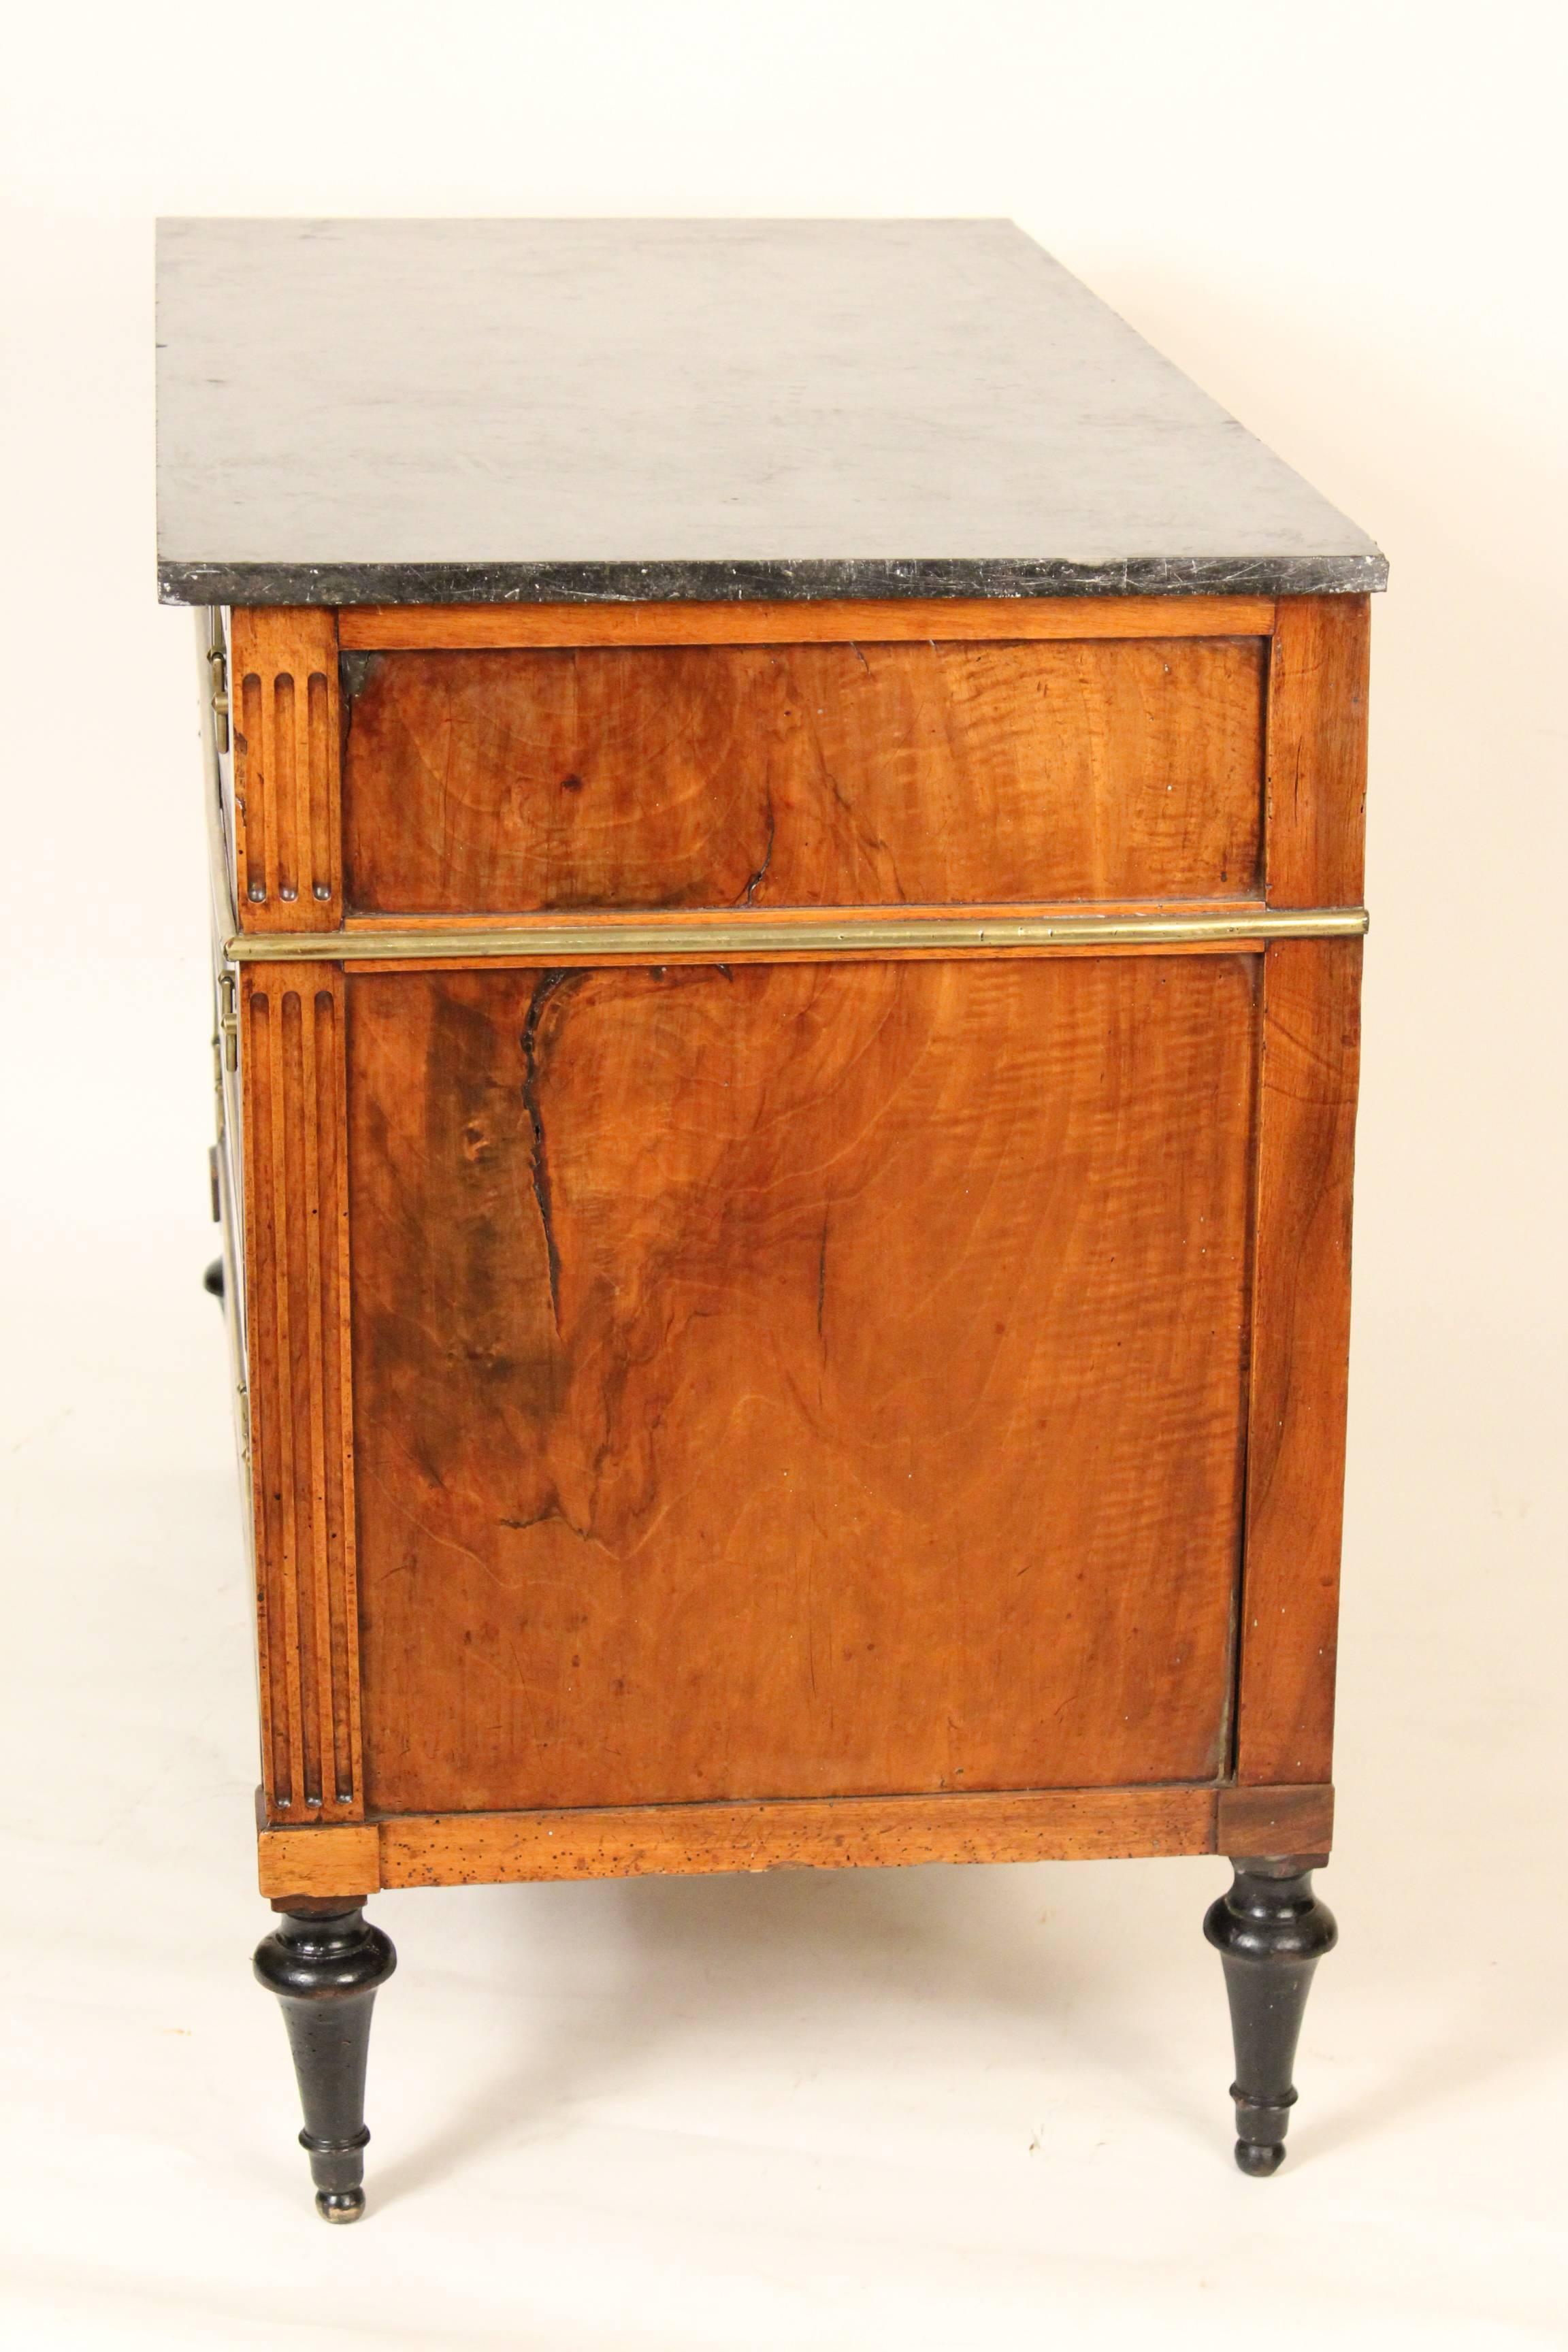 Louis XVI walnut chest of drawers with brass mounts and inlay with a marble top, early 19th century.